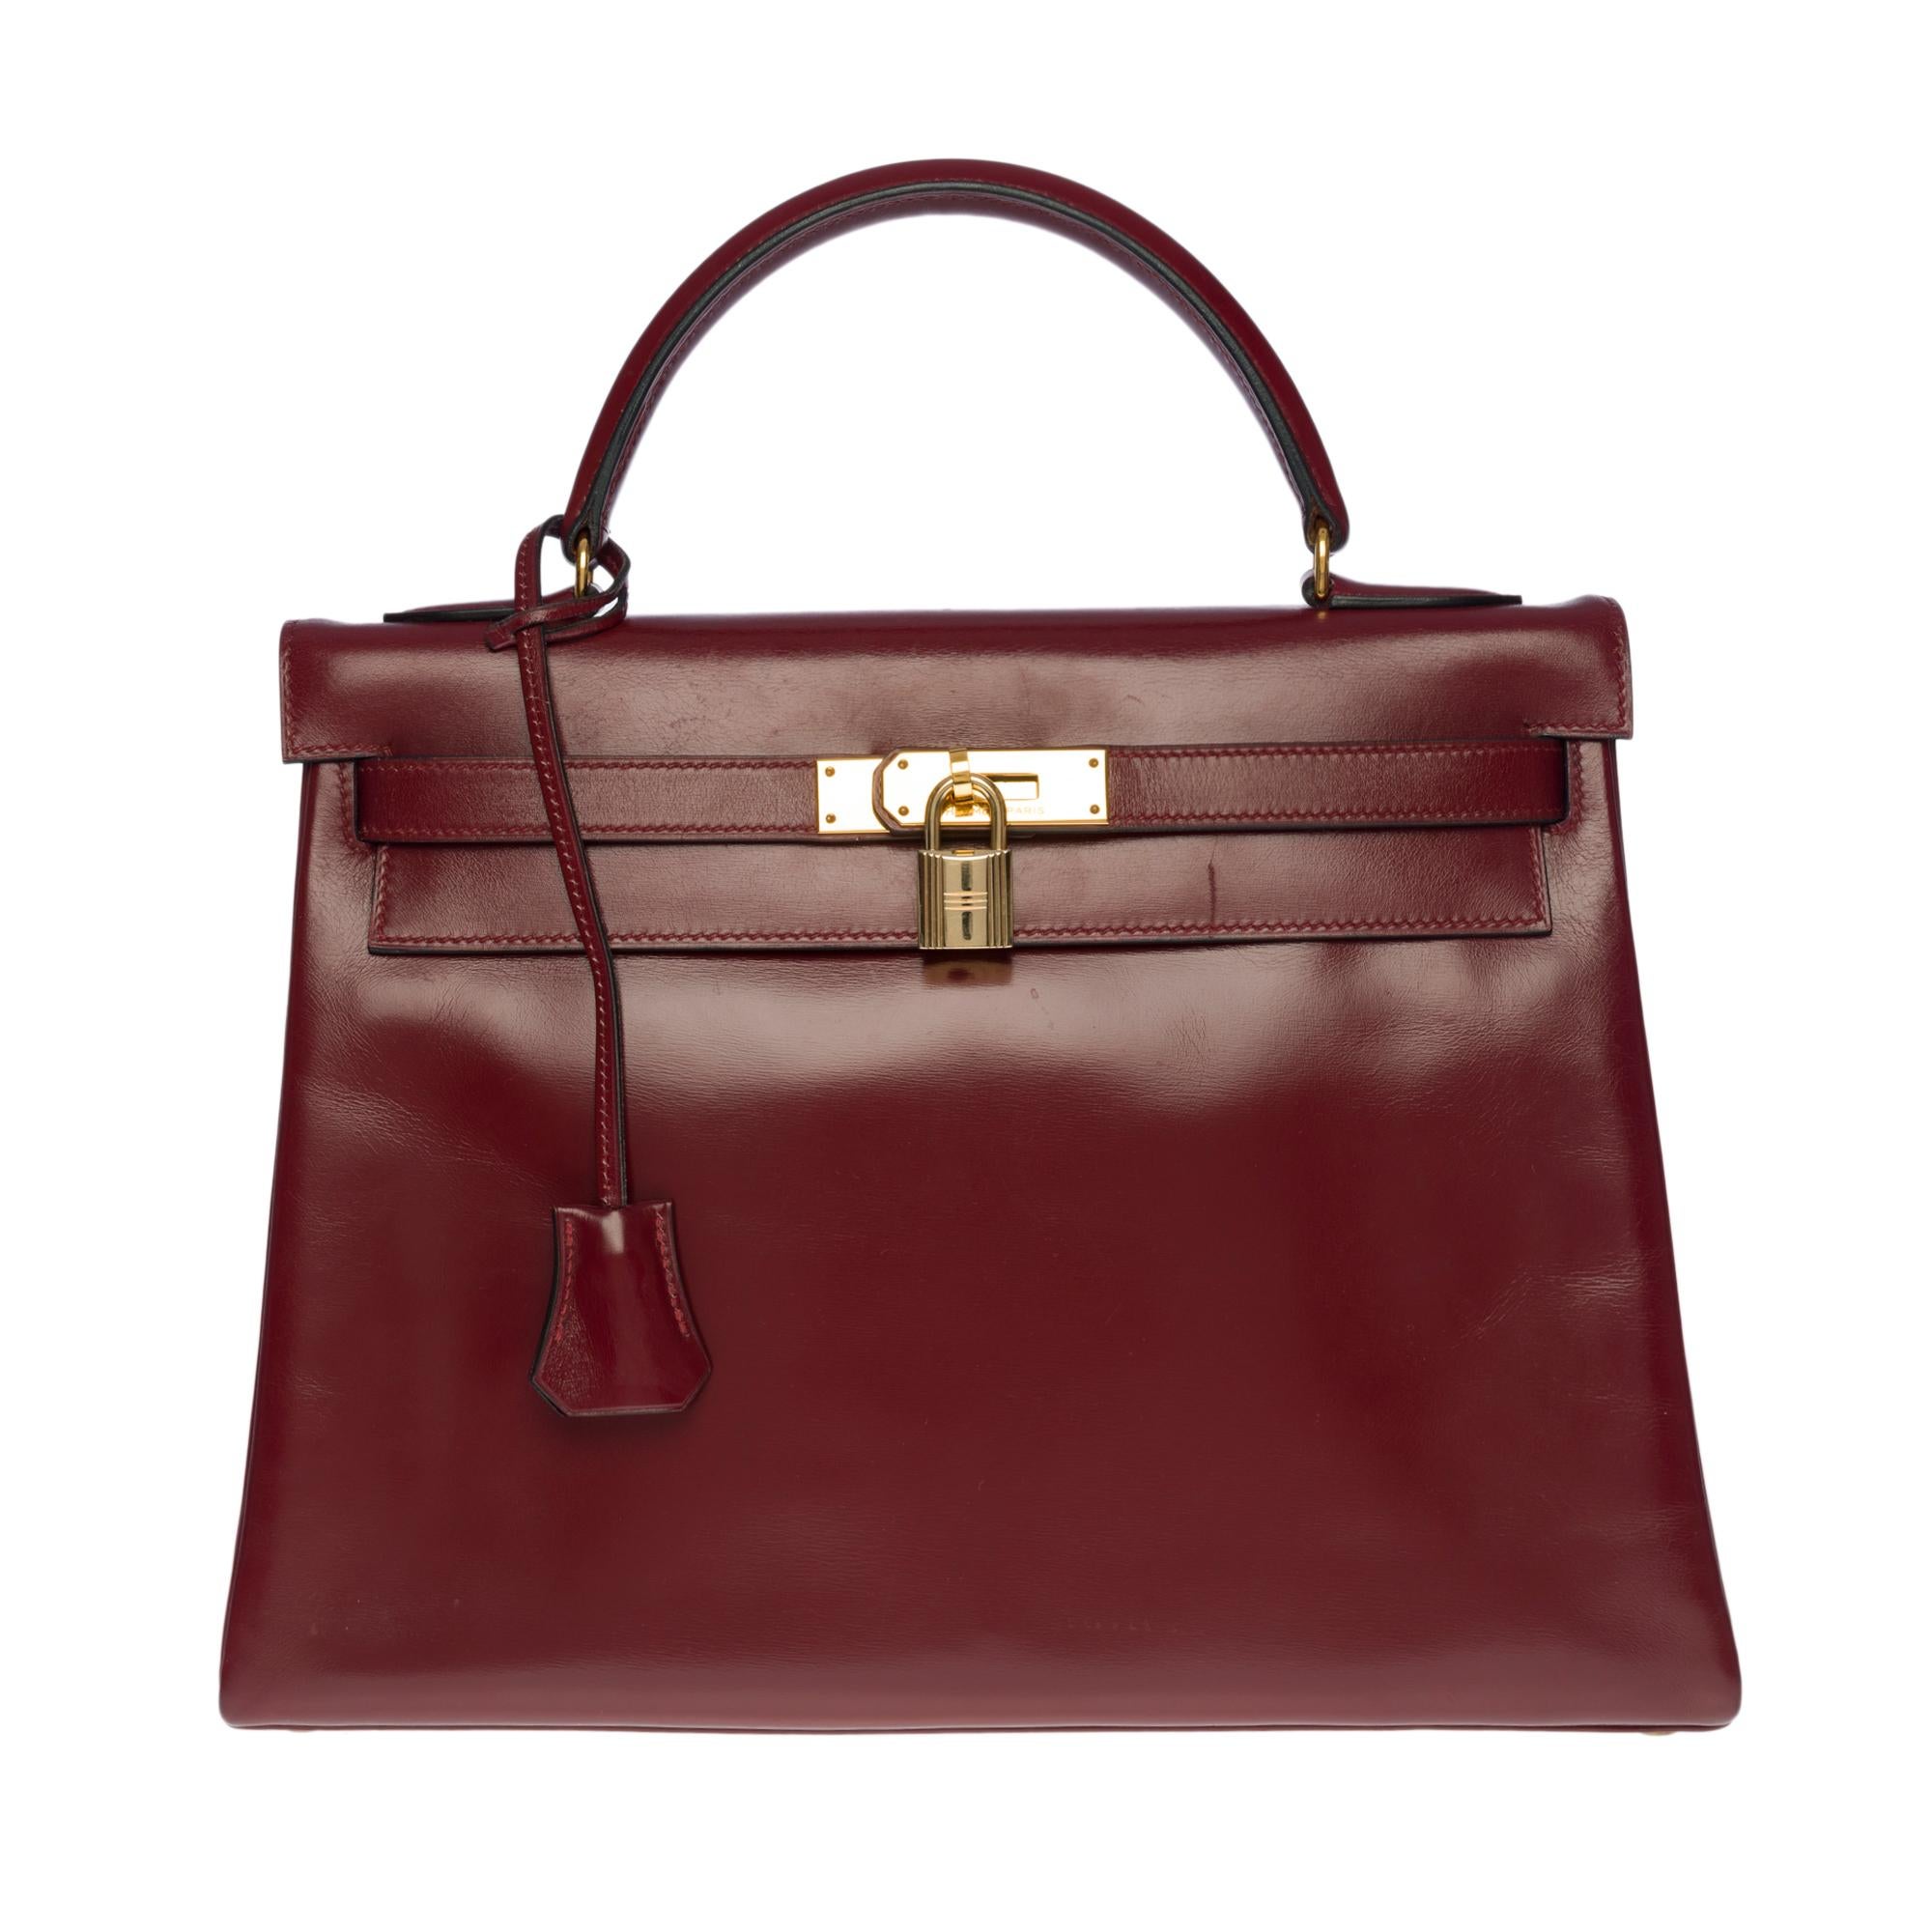 Beautiful Hermès Kelly 32 retourné handbag in burgundy leather (Rouge H), gold plated metal hardware, burgundy leather box handle allowing a hand or shoulder support
 
Flap closure
Inner lining in burgundy leather
A zippered pocket
Double patch